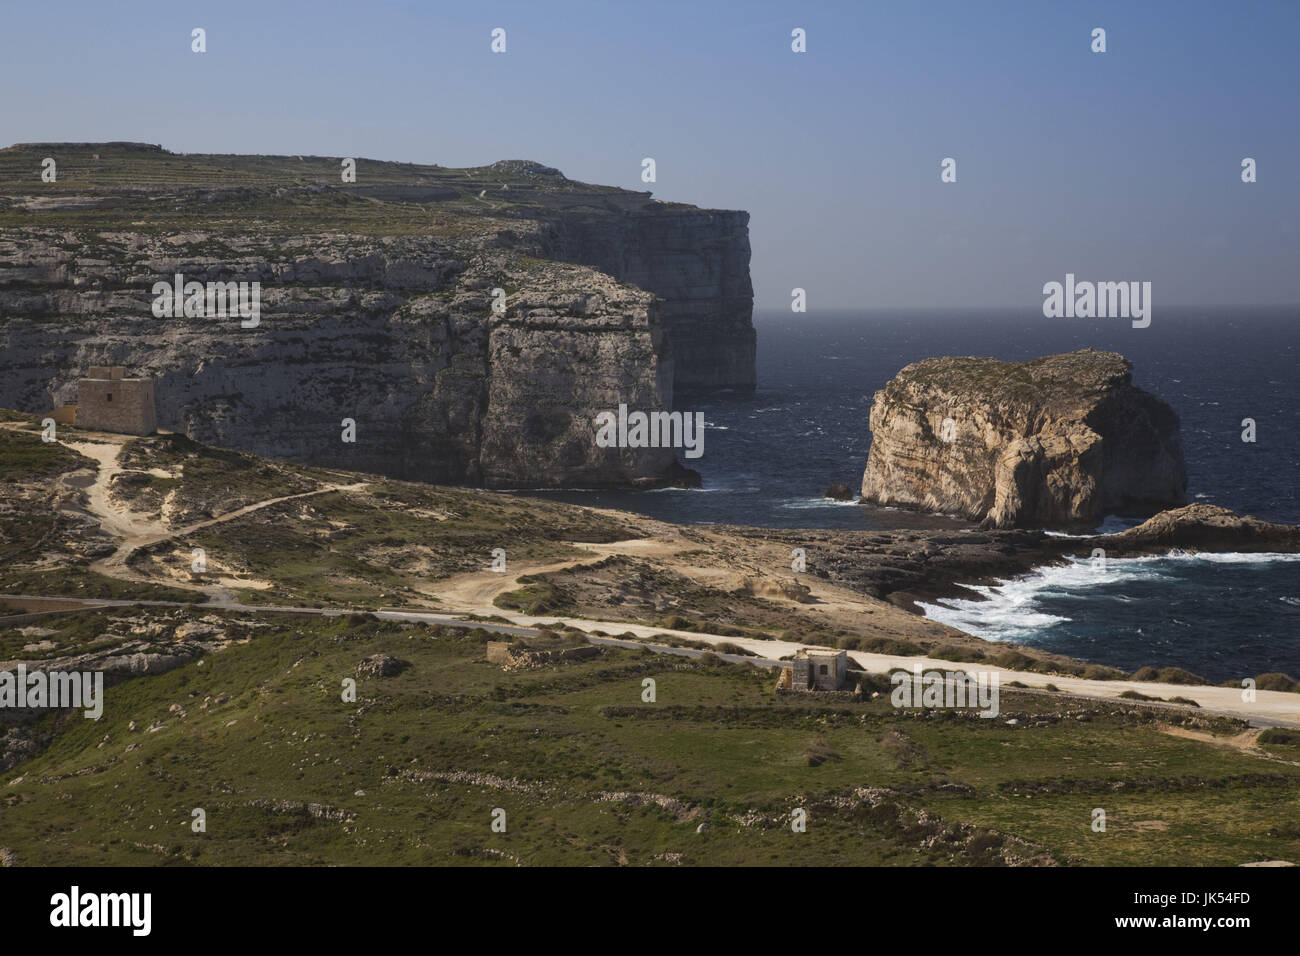 Malta, Gozo Island, Dwejra, coastal cliffs and Fungus Rock, only place in Europe where General's Root-cynomorium coccineus is found. This fungus was highly prized for its pharmaceutical properties in the Middle Ages. Stock Photo